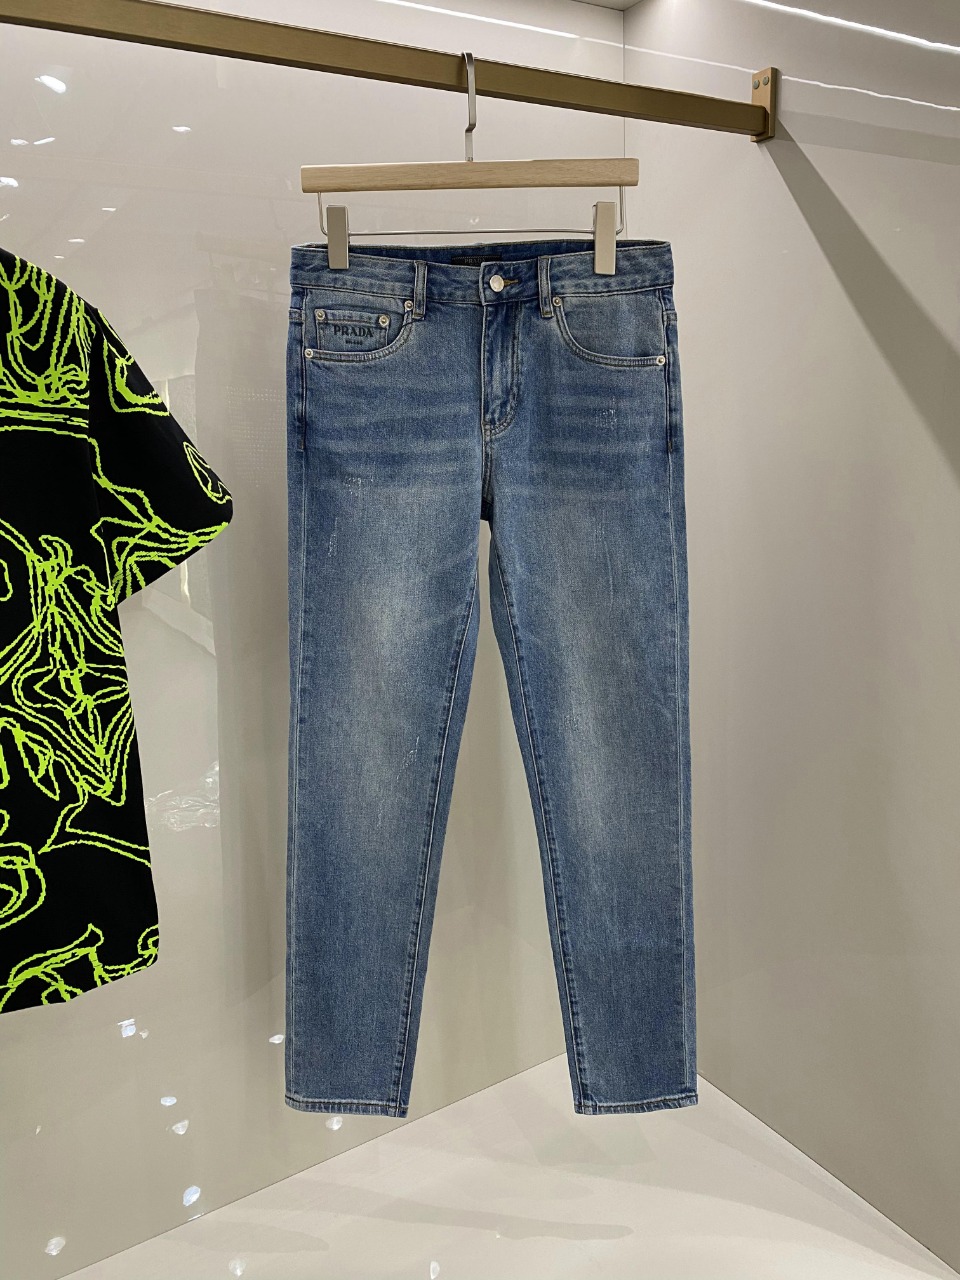 Prada Clothing Jeans Spring/Summer Collection